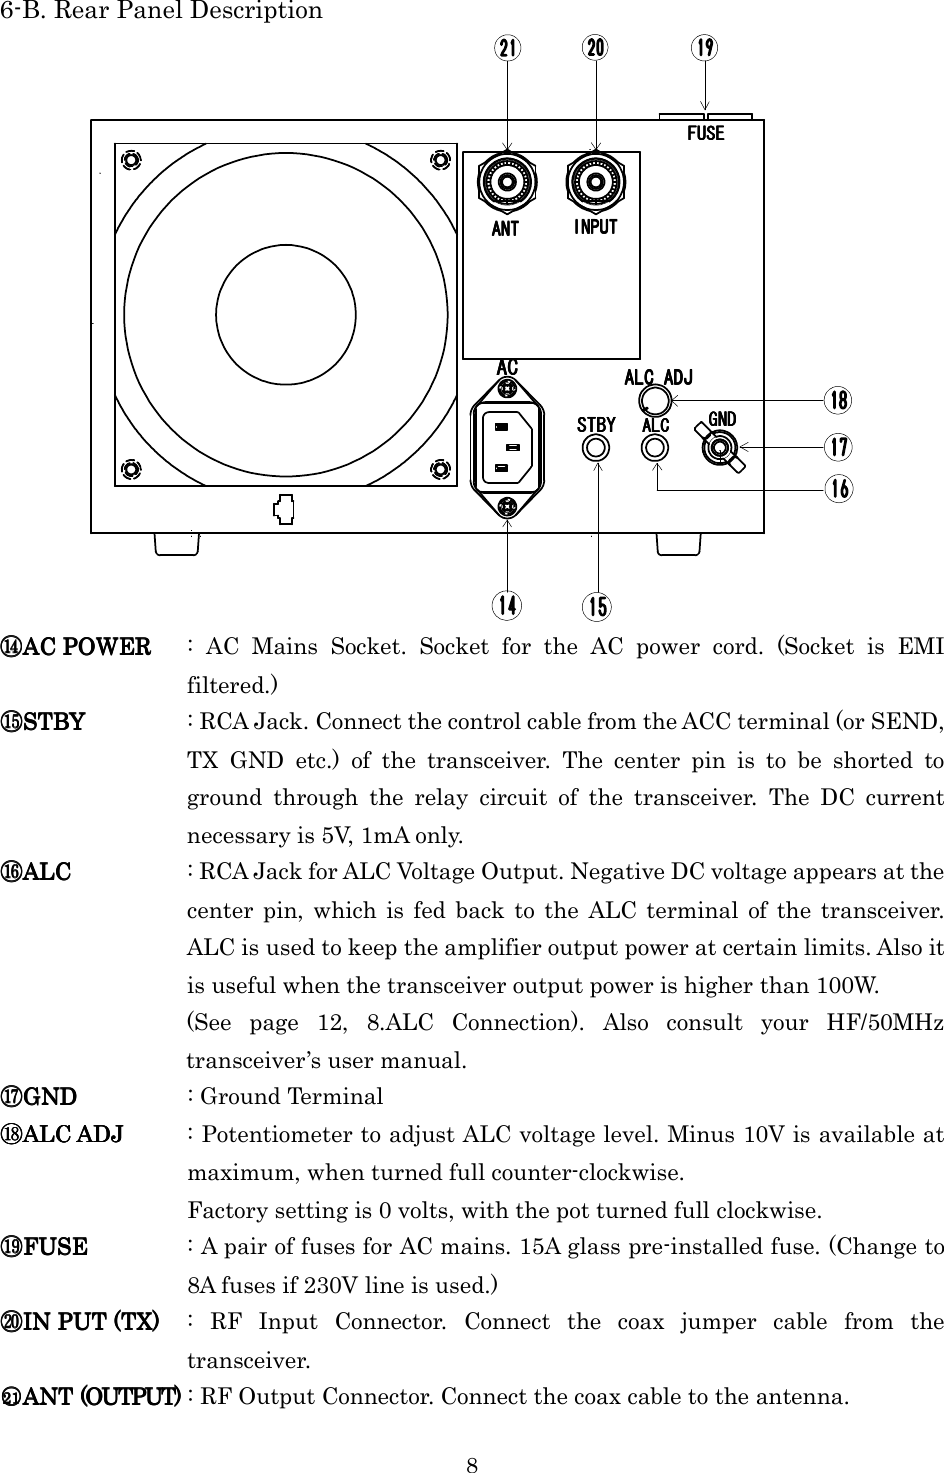 8 6-B. Rear Panel Description AAAALLLLCCCCAAAALLLLCCCC AAAADDDDJJJJSSSSTTTTBBBBYYYYGGGGNNNNDDDDAAAANNNNTTTTAAAACCCCFFFFUUUUSSSSEEEEIIIINNNNPPPPUUUUTTTT ⑭⑭⑭⑭AC POWERAC POWERAC POWERAC POWER     :  AC  Mains  Socket.  Socket  for  the  AC  power  cord.  (Socket  is  EMI filtered.) ⑮⑮⑮⑮STBYSTBYSTBYSTBY  : RCA Jack. Connect the control cable from the ACC terminal (or SEND, TX  GND  etc.)  of  the  transceiver.  The  center  pin  is  to  be  shorted  to ground  through  the  relay  circuit  of  the  transceiver.  The  DC  current necessary is 5V, 1mA only. ⑯⑯⑯⑯ALCALCALCALC     : RCA Jack for ALC Voltage Output. Negative DC voltage appears at the center  pin,  which  is fed  back  to  the  ALC  terminal  of  the  transceiver. ALC is used to keep the amplifier output power at certain limits. Also it is useful when the transceiver output power is higher than 100W. (See  page  12,  8.ALC  Connection).  Also  consult  your  HF/50MHz transceiver’s user manual. ⑰⑰⑰⑰GNDGNDGNDGND     : Ground Terminal ⑱⑱⑱⑱ALC ADJALC ADJALC ADJALC ADJ     : Potentiometer to adjust ALC voltage level. Minus 10V is available at maximum, when turned full counter-clockwise. Factory setting is 0 volts, with the pot turned full clockwise. ⑲⑲⑲⑲FUSEFUSEFUSEFUSE  : A pair of fuses for AC mains. 15A glass pre-installed fuse. (Change to 8A fuses if 230V line is used.) ⑳⑳⑳⑳ININININ    PUT (TX)PUT (TX)PUT (TX)PUT (TX)  :  RF  Input  Connector.  Connect  the  coax  jumper  cable  from  the transceiver. ○○○○21212121ANT ANT ANT ANT (OUTPUT)(OUTPUT)(OUTPUT)(OUTPUT) : RF Output Connector. Connect the coax cable to the antenna.    